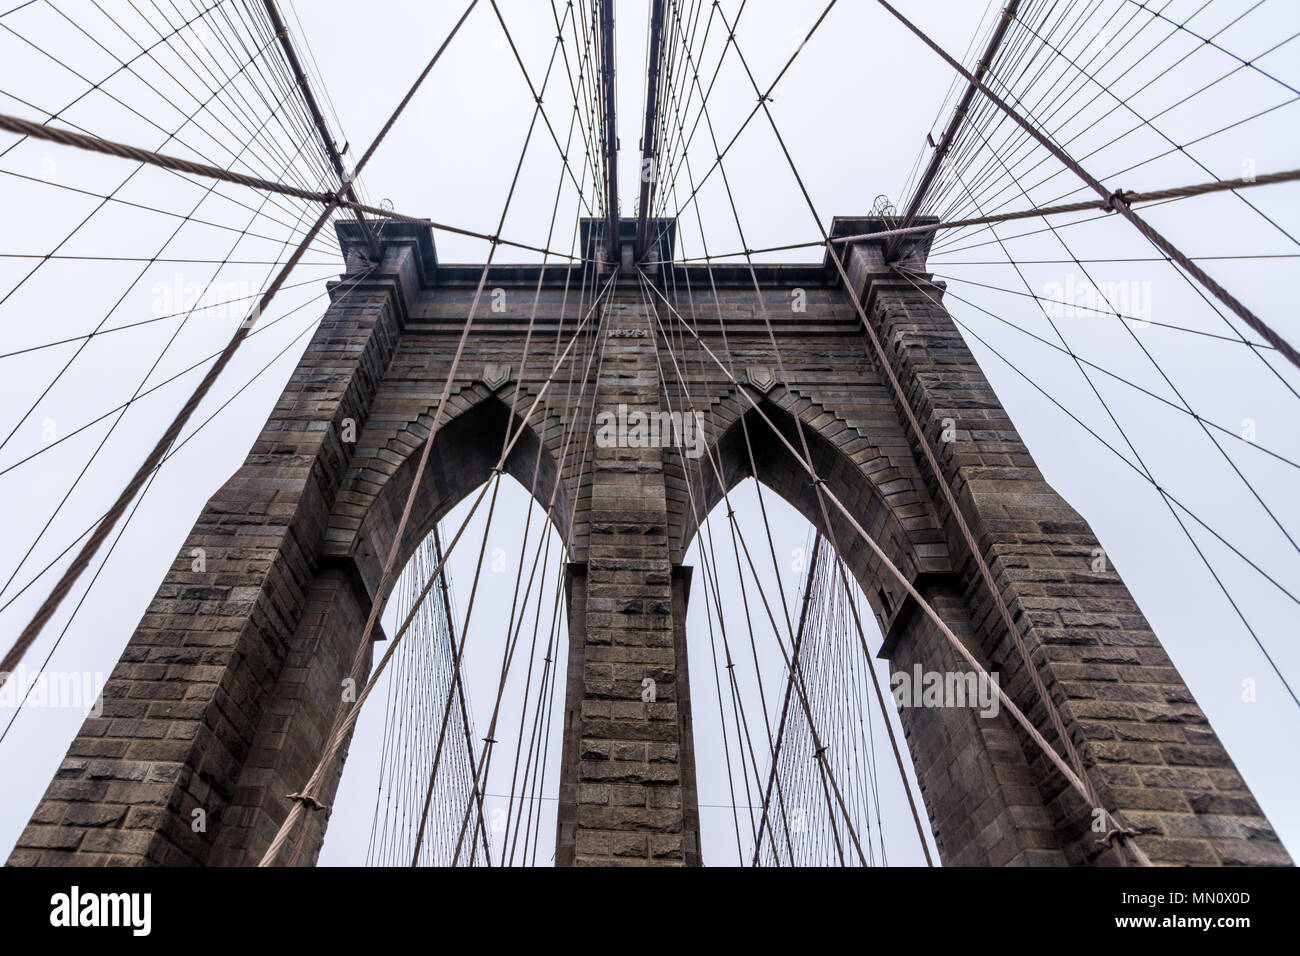 Brooklyn bridge arches and suspension wires Stock Photo